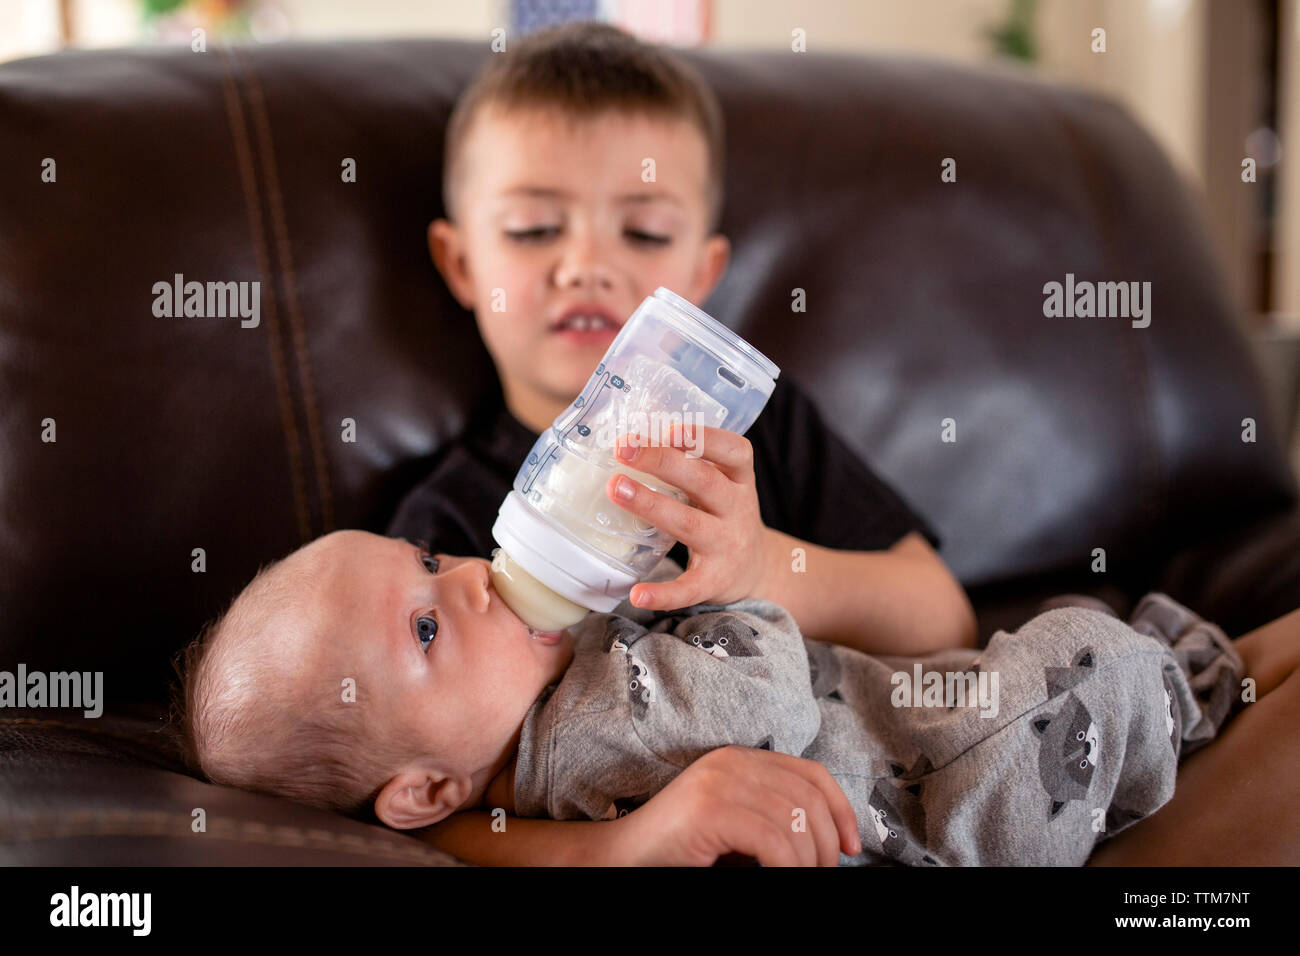 https://c8.alamy.com/comp/TTM7NT/boy-feeding-milk-to-brother-from-baby-bottle-while-sitting-on-sofa-at-home-TTM7NT.jpg